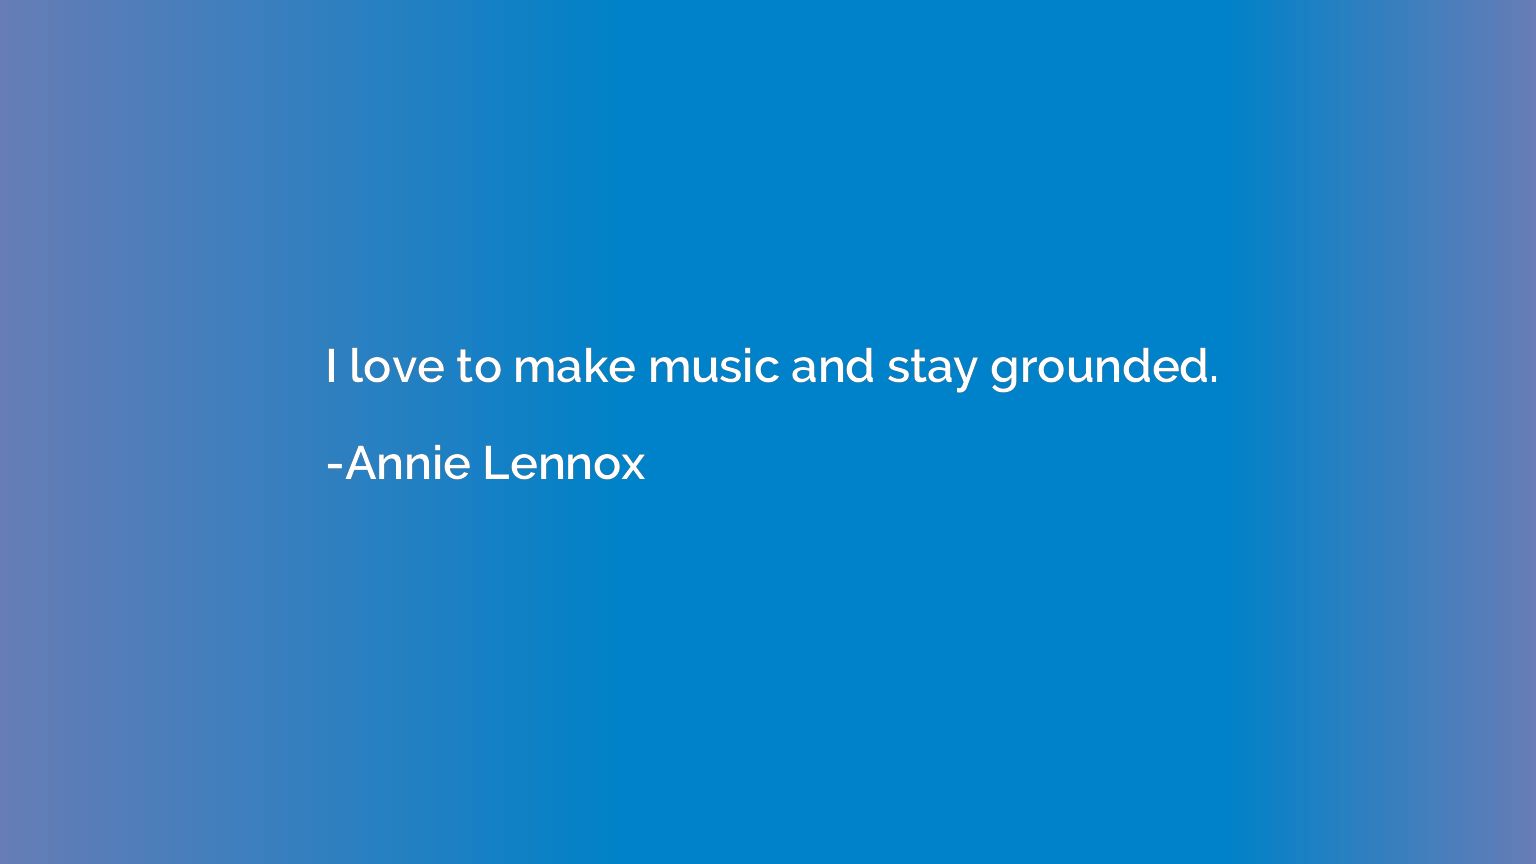 I love to make music and stay grounded.